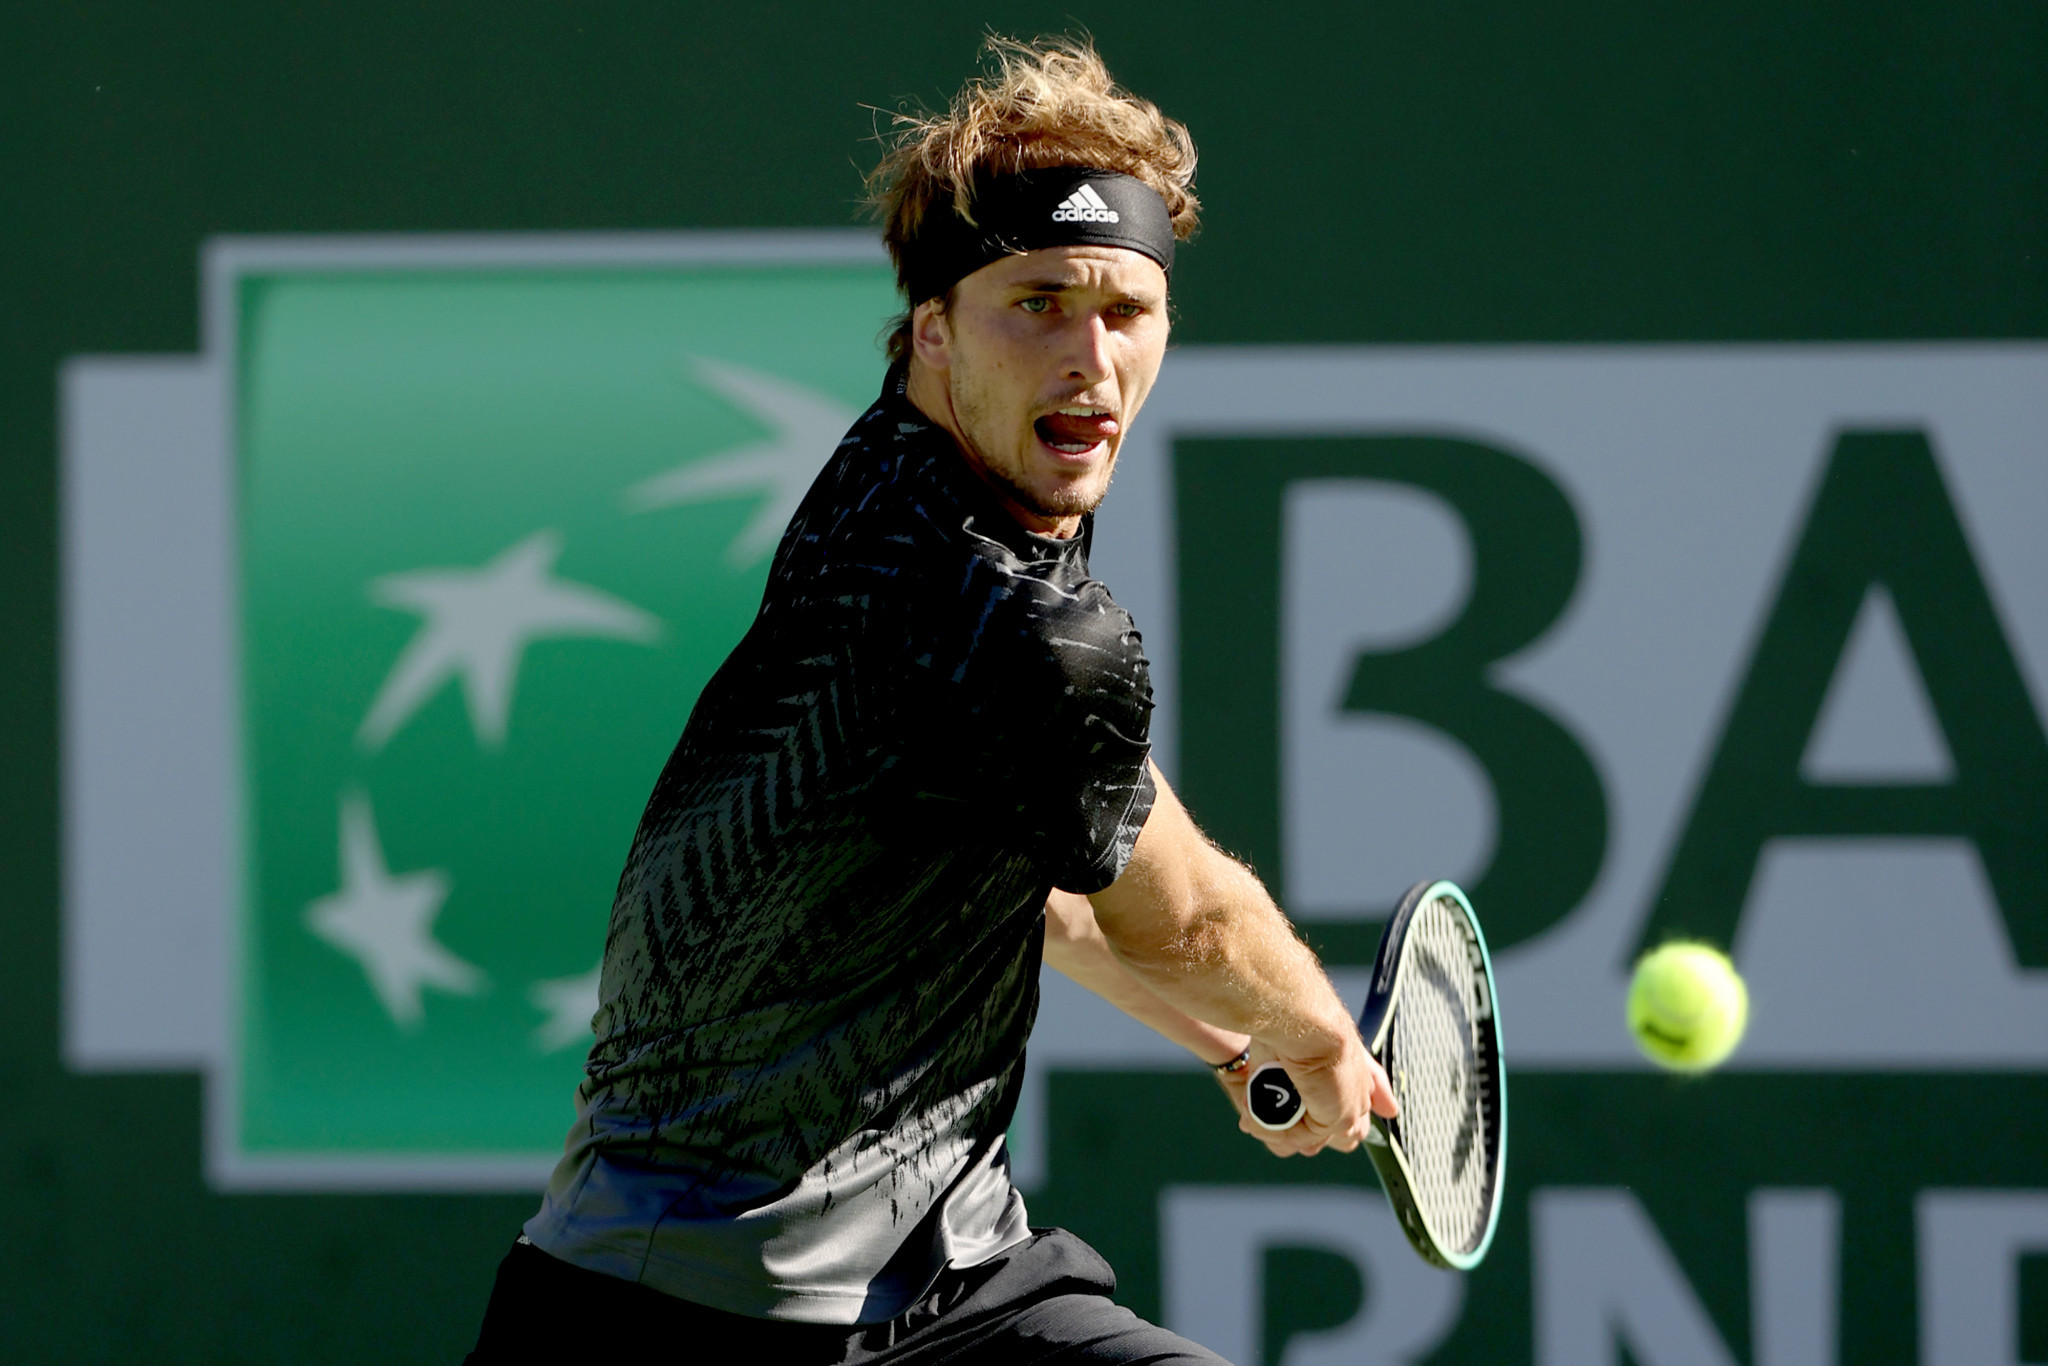 Alexander Zverev blew two match points as he lost in a deciding tiebreak to Taylor Fritz at the Indian Wells Masters ©Getty Images